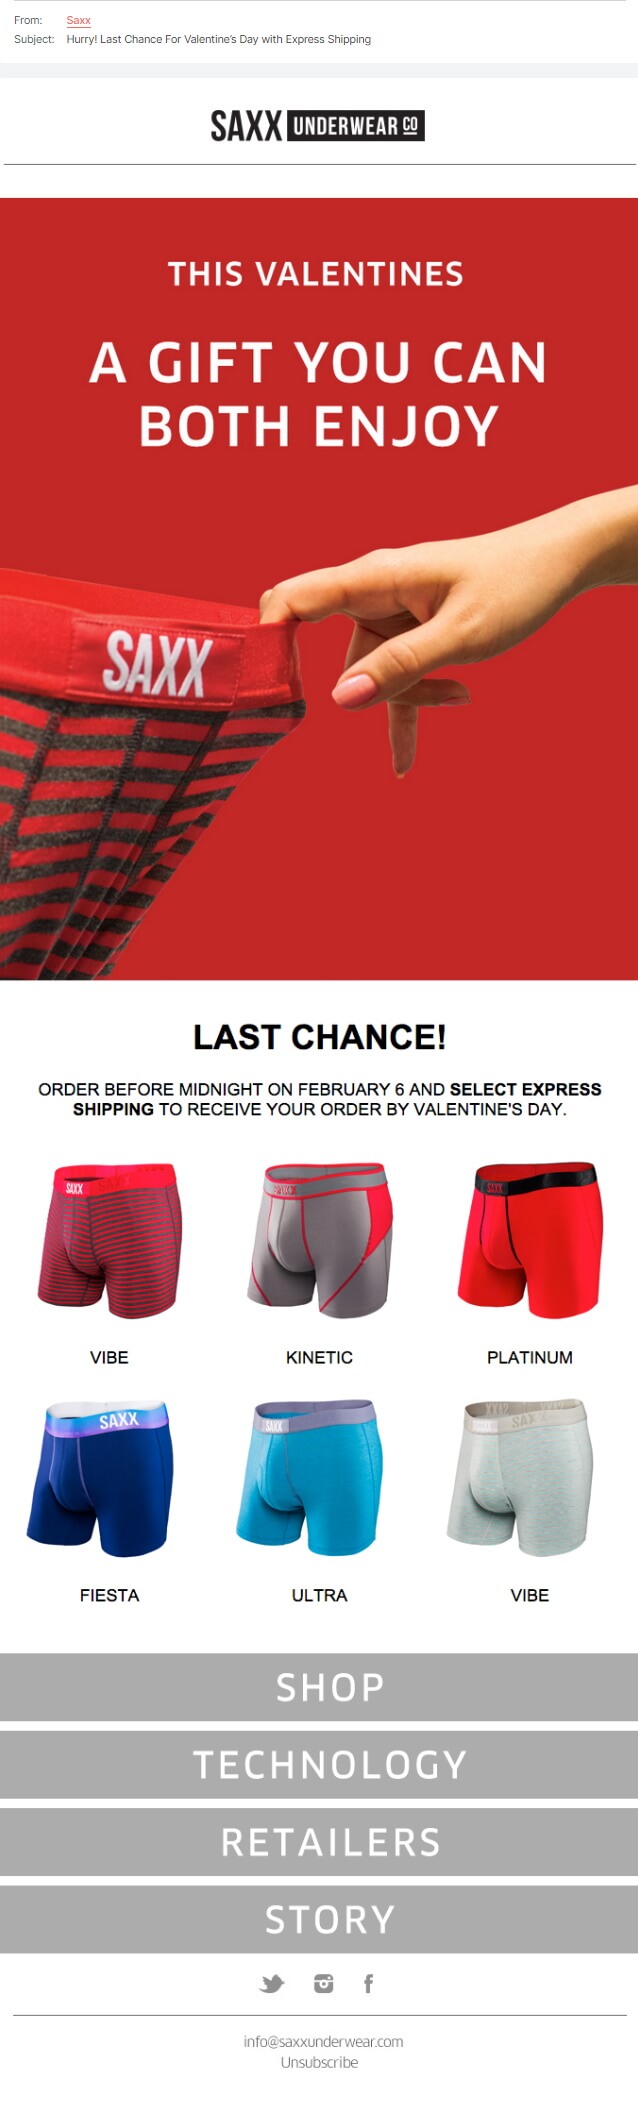 The last chance email from SAXX Underwear